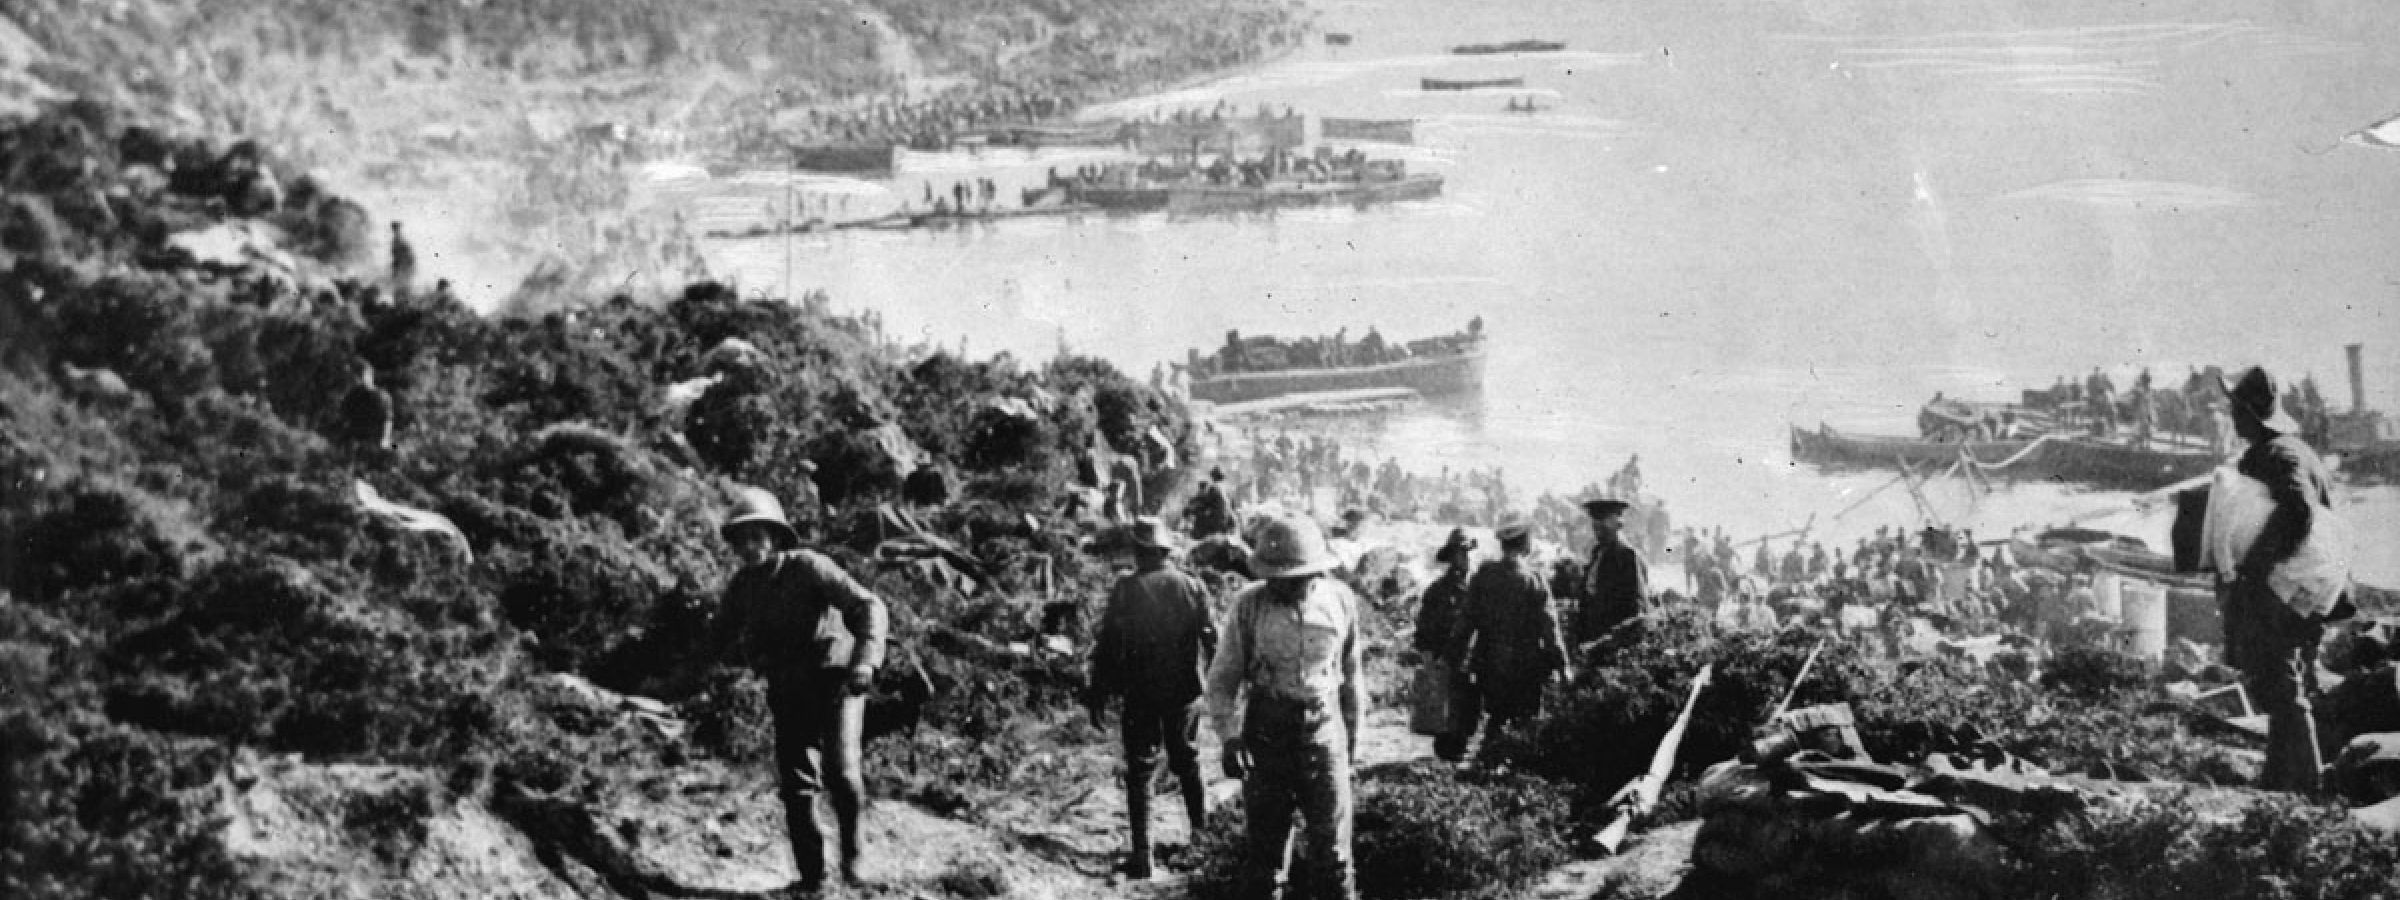 New Zealand and Australian soldiers landing at Anzac Cove on 25 April, 1915 